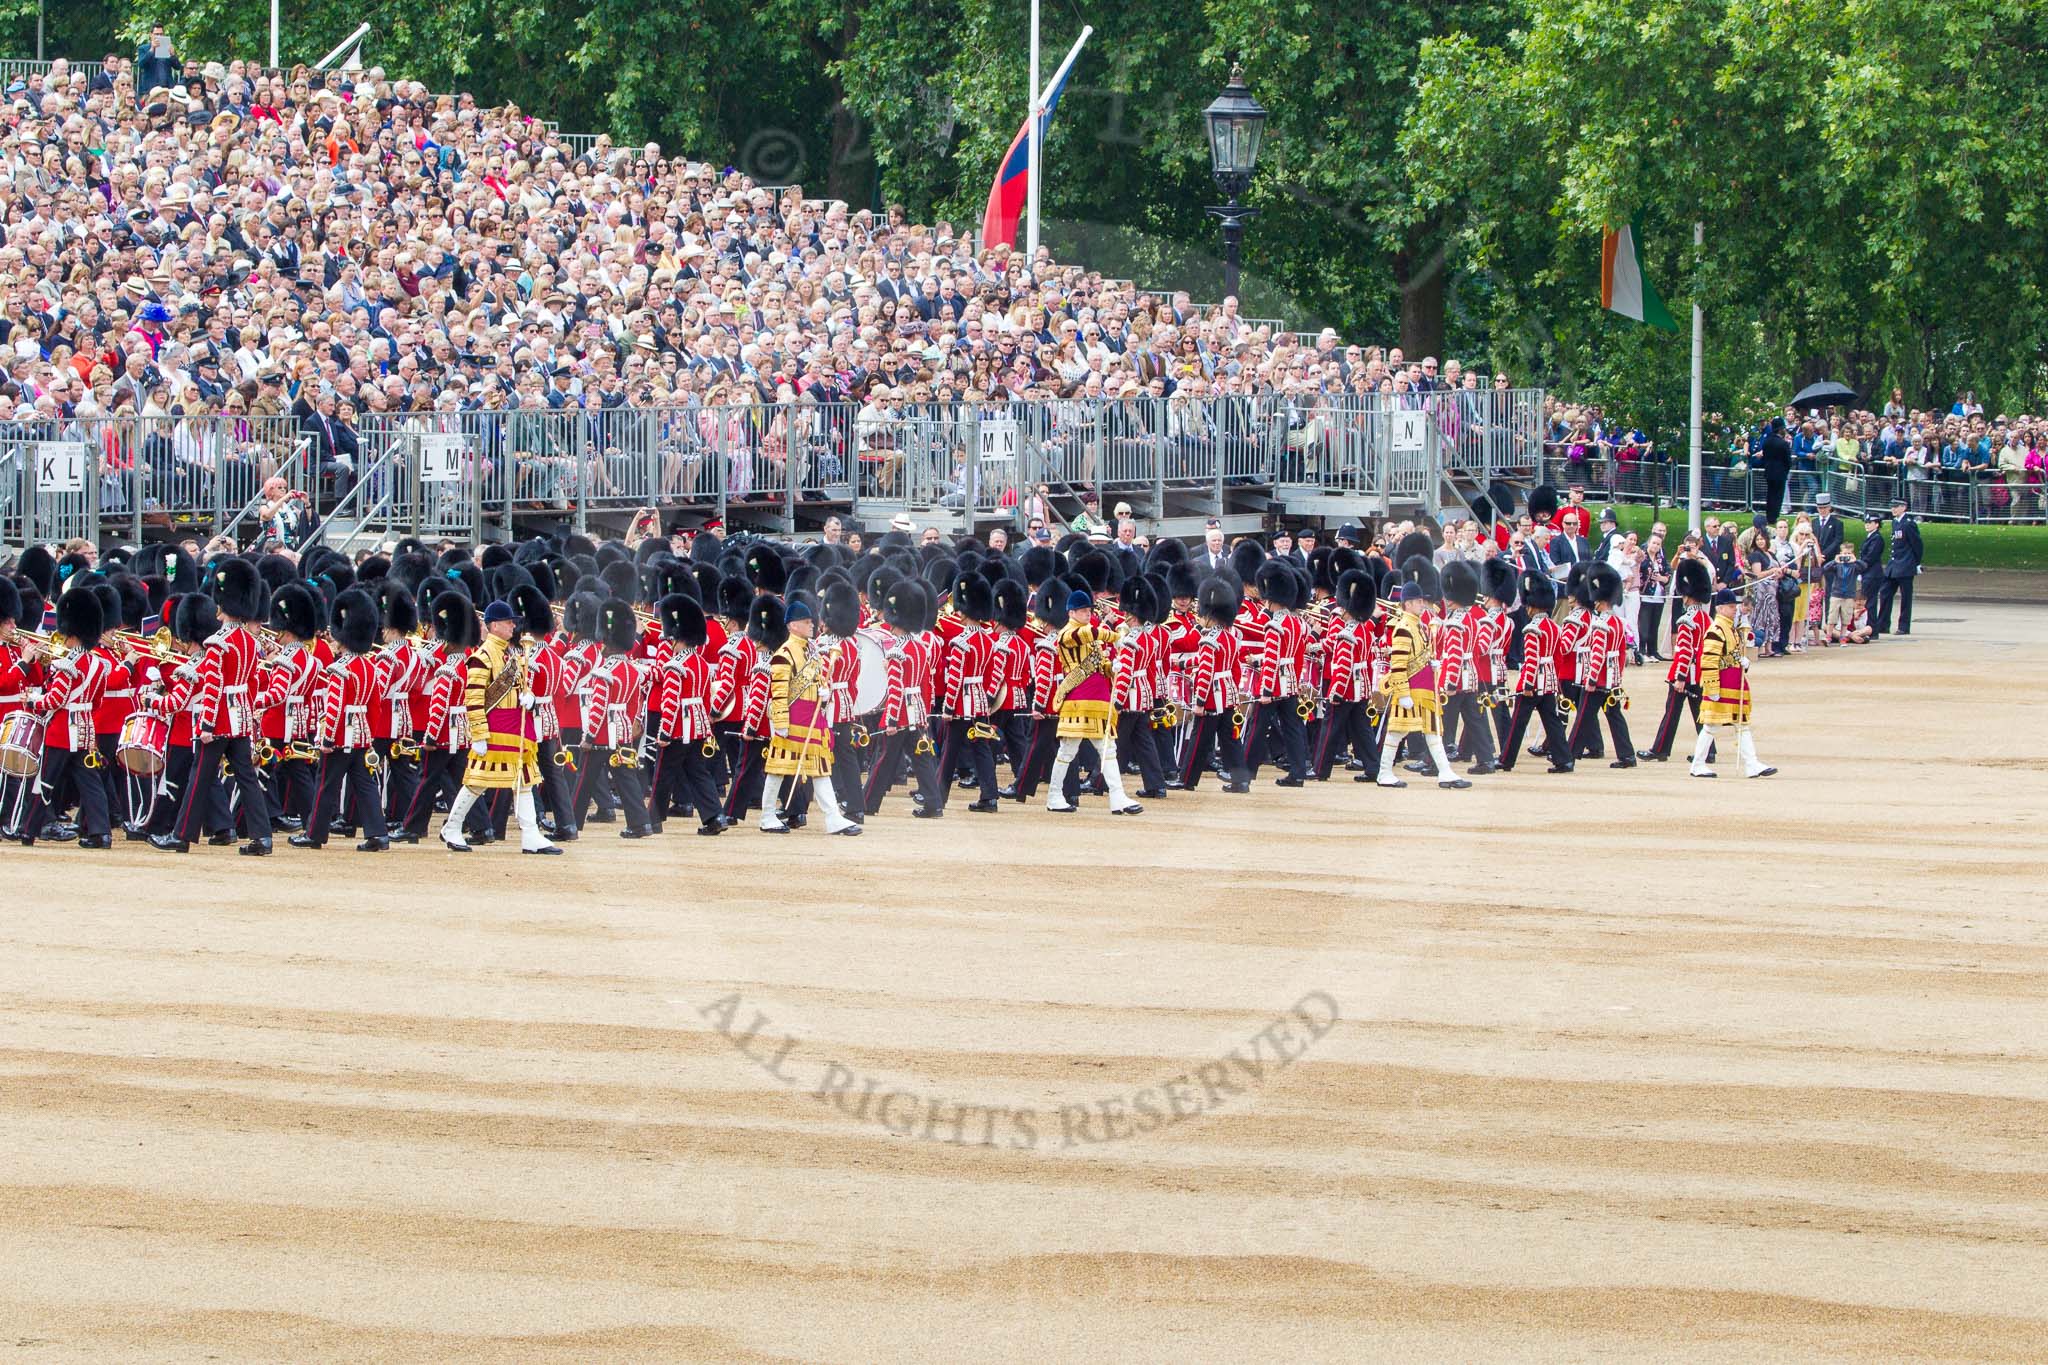 Trooping the Colour 2014.
Horse Guards Parade, Westminster,
London SW1A,

United Kingdom,
on 14 June 2014 at 11:27, image #568